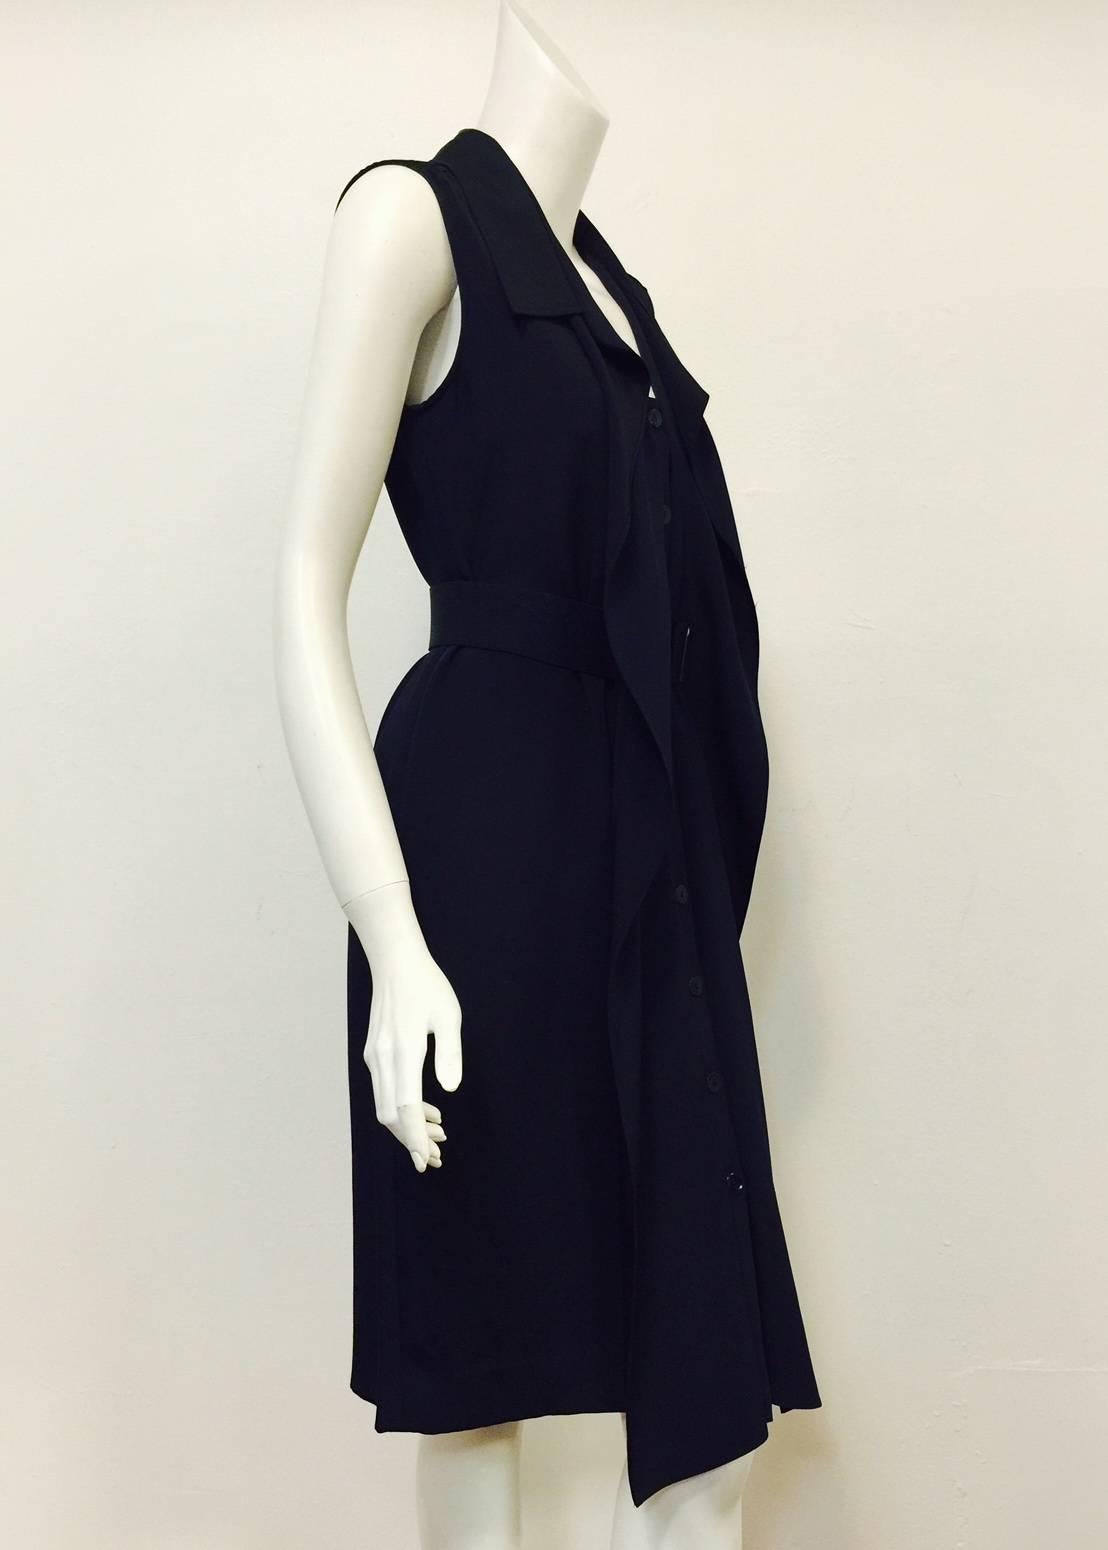 Oscar de la Renta Navy Belted Dress is ageless and timeless. Features exquisite silk, sleeveless design, and slightly above the knee length.  Reminiscent of a men's shirt, dress has 9 button front closure, cutaway collar and tiered, rear box pleats!